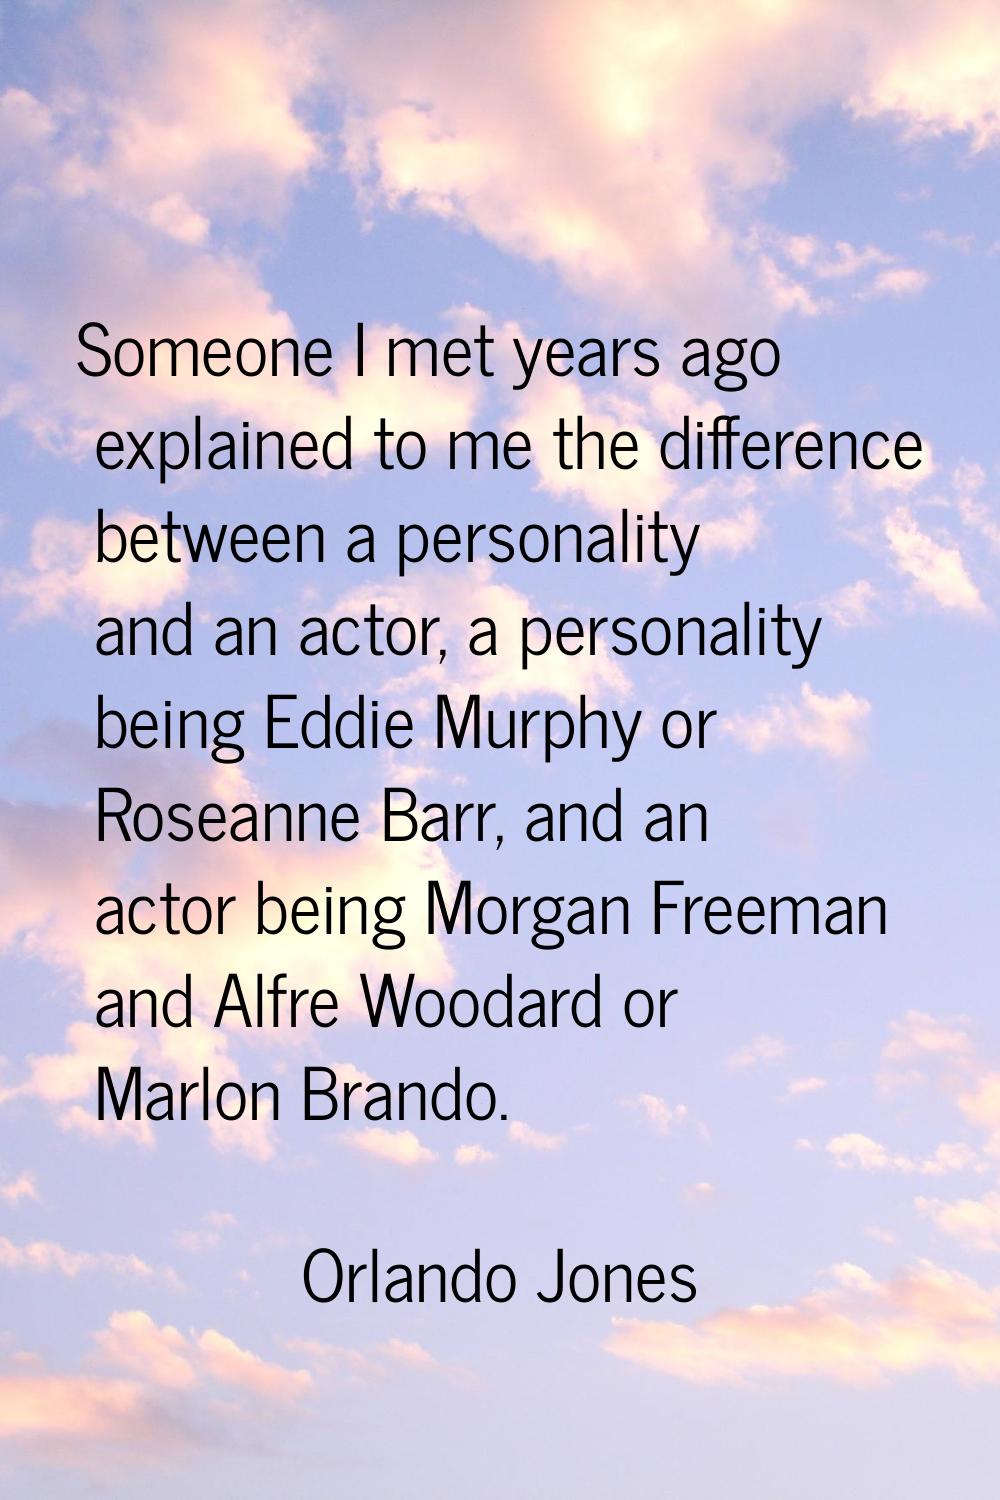 Someone I met years ago explained to me the difference between a personality and an actor, a person